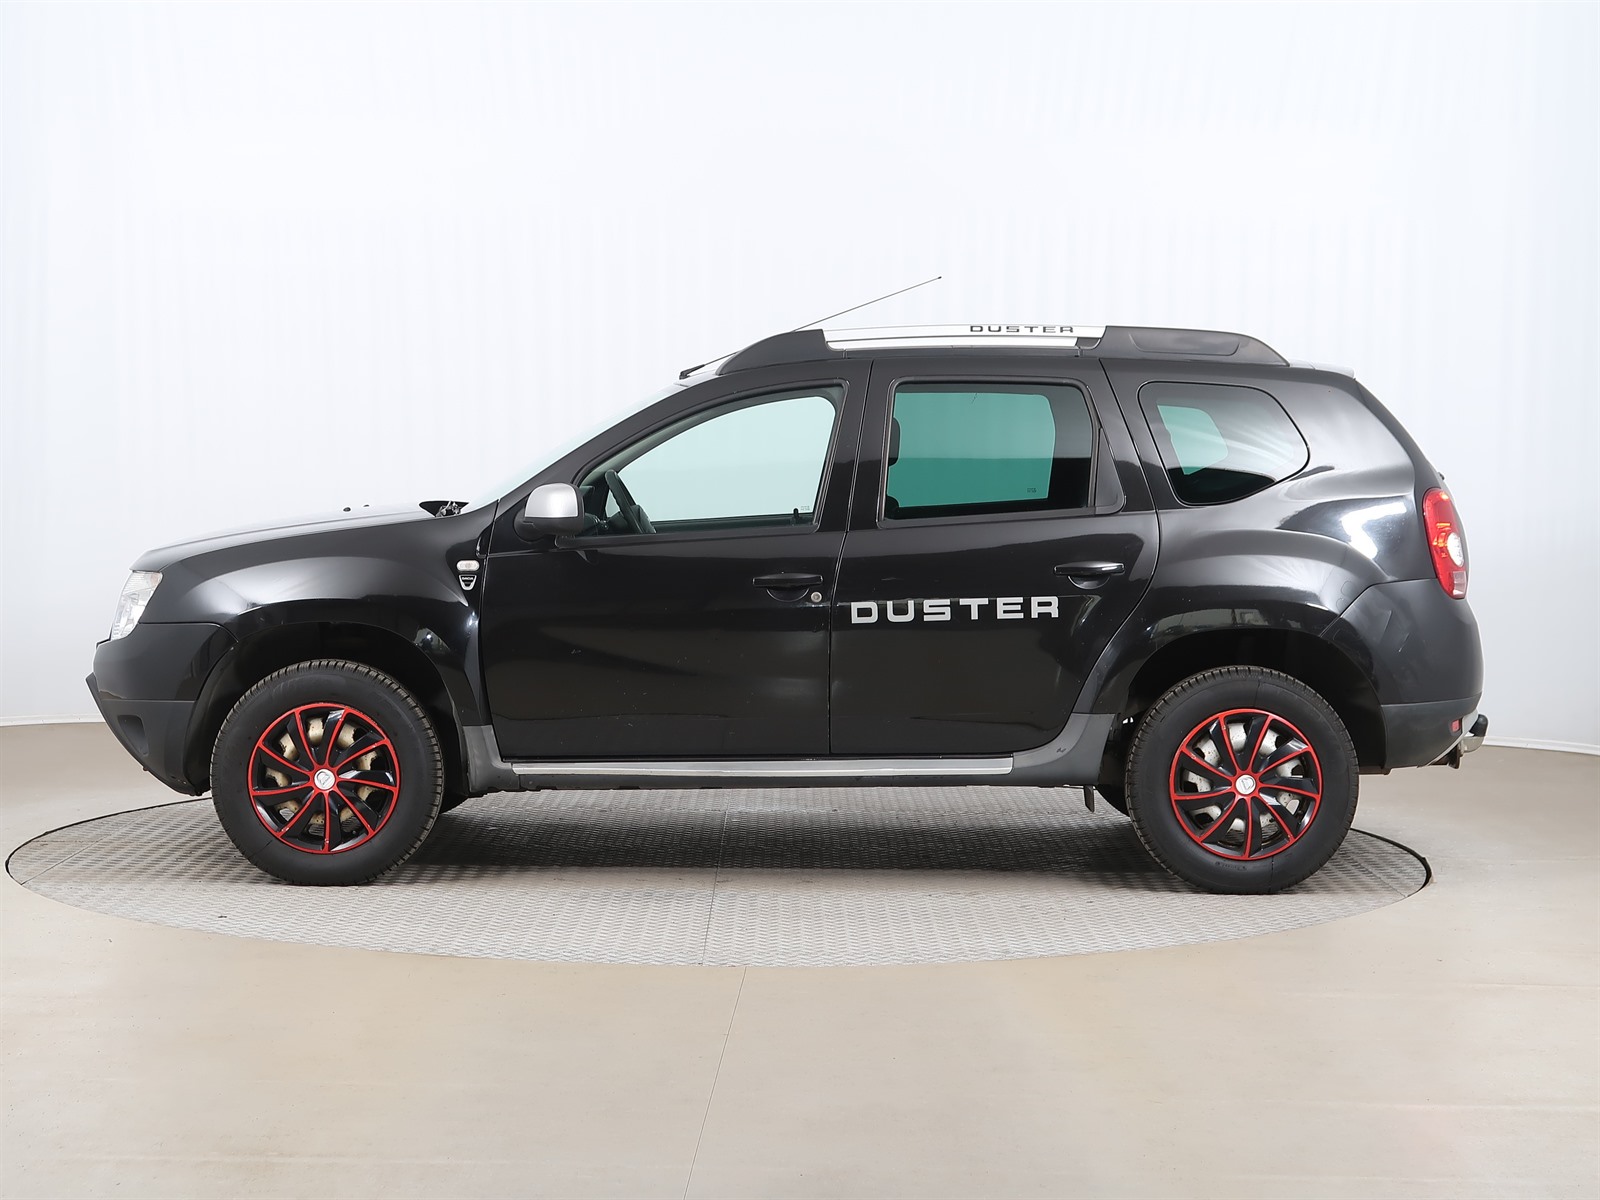 Dacia Duster, 2011 - pohled č. 4